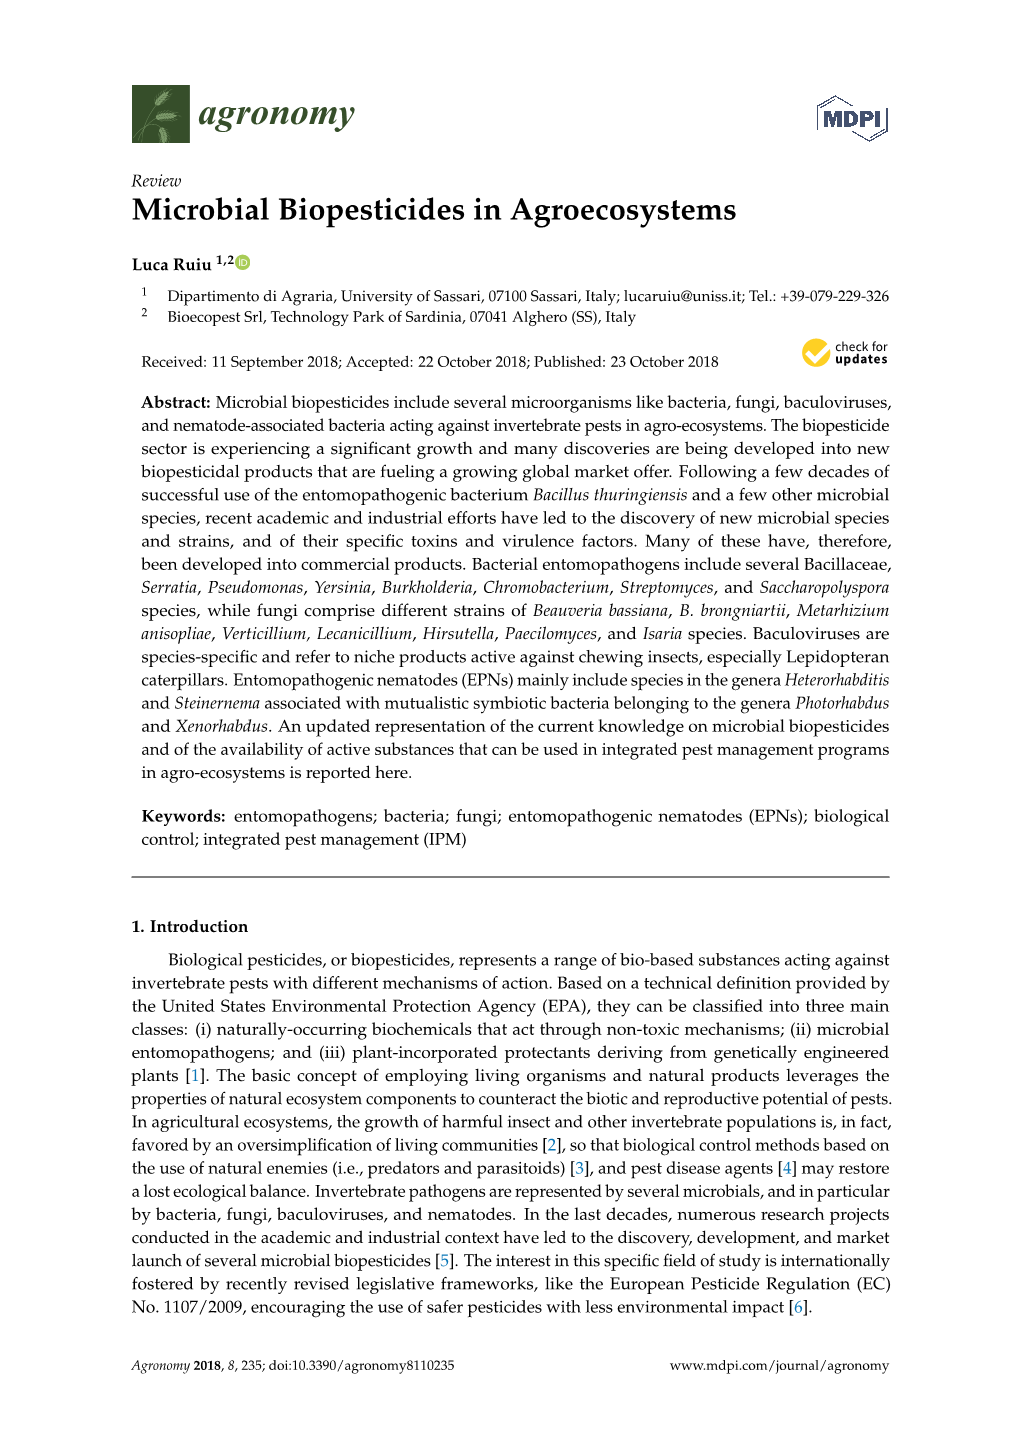 Microbial Biopesticides in Agroecosystems